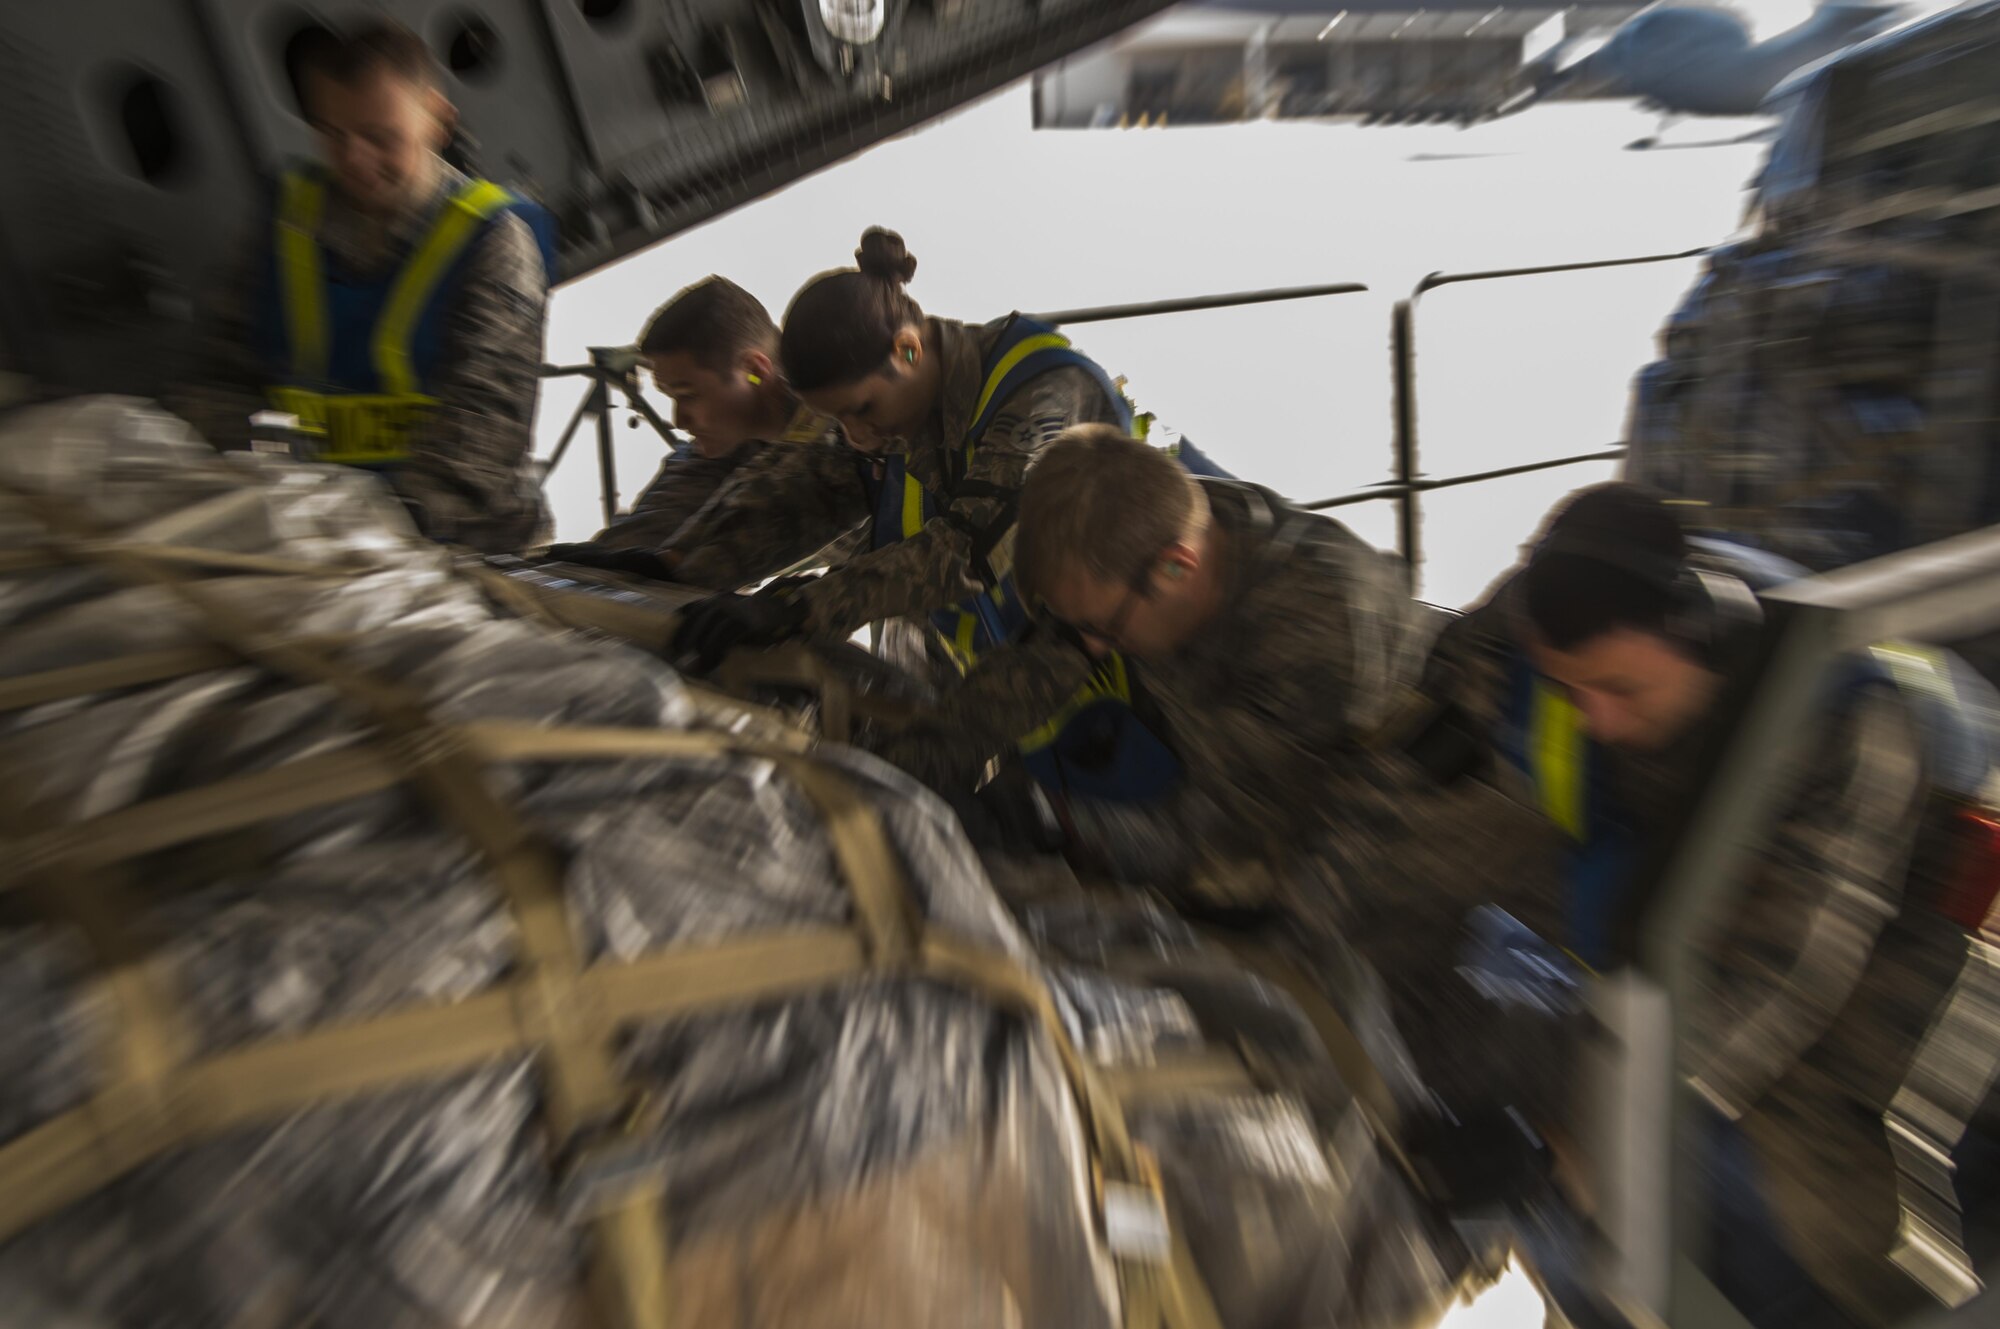 A pallet of equipment is loaded onto a C-17 Globemaster III at Joint Base McGuire-Dix-Lakehurst, N.J., for a 621st Contingency Response Wing deployment mission to Port-au-Prince, Haiti, October 6, 2016. This mission will mark the first time the Joint Task Force-Port Opening will consist of three entities; the 621st CRW, U.S. Army's 689th Rapid Port Opening Element, and the Defense Logistics Agency.(U.S. Air Force photo by Tech. Sgt. Gustavo Gonzalez/Released)